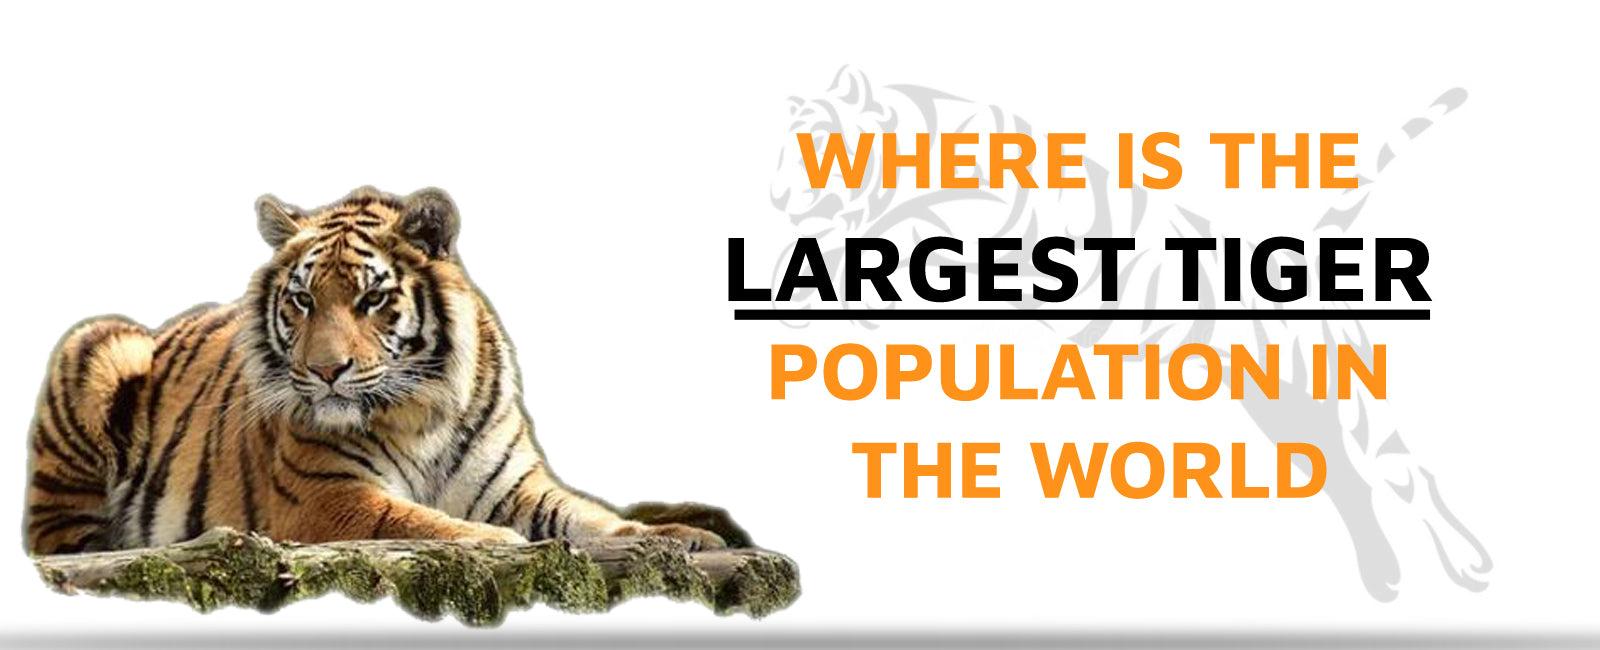 Where is the Largest Tiger Population in the World